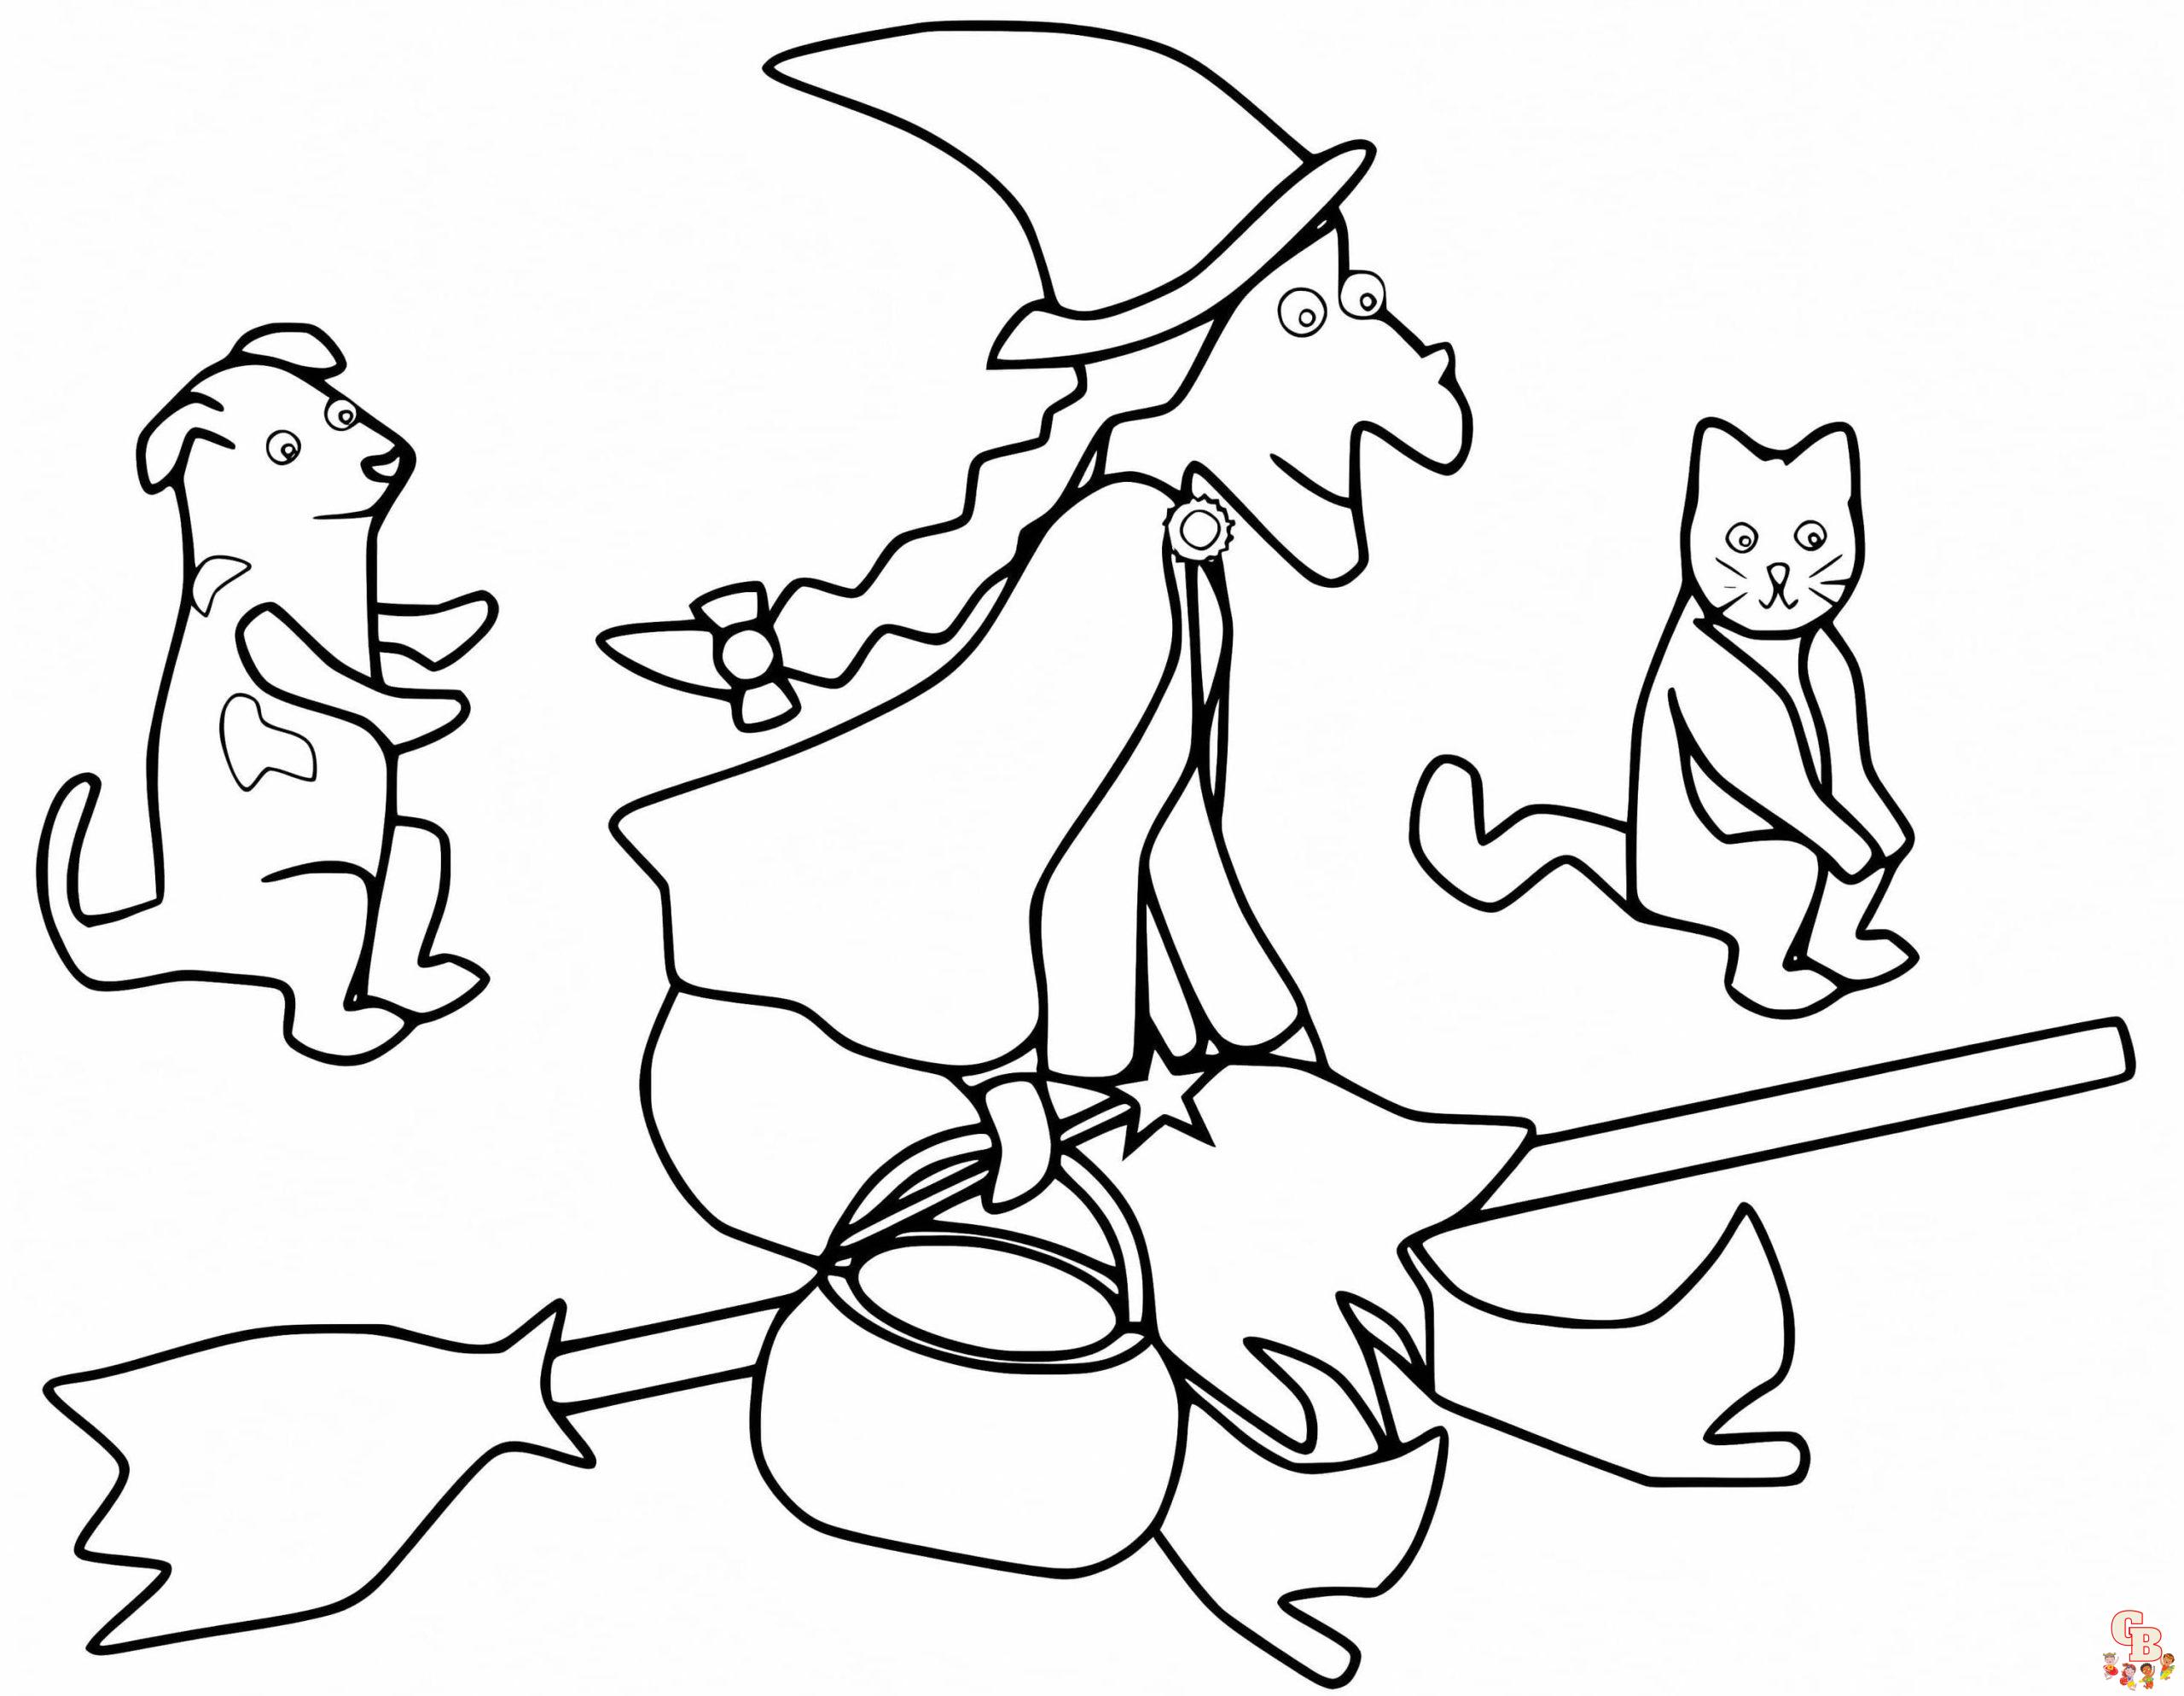 Room on the Broom coloring pages free